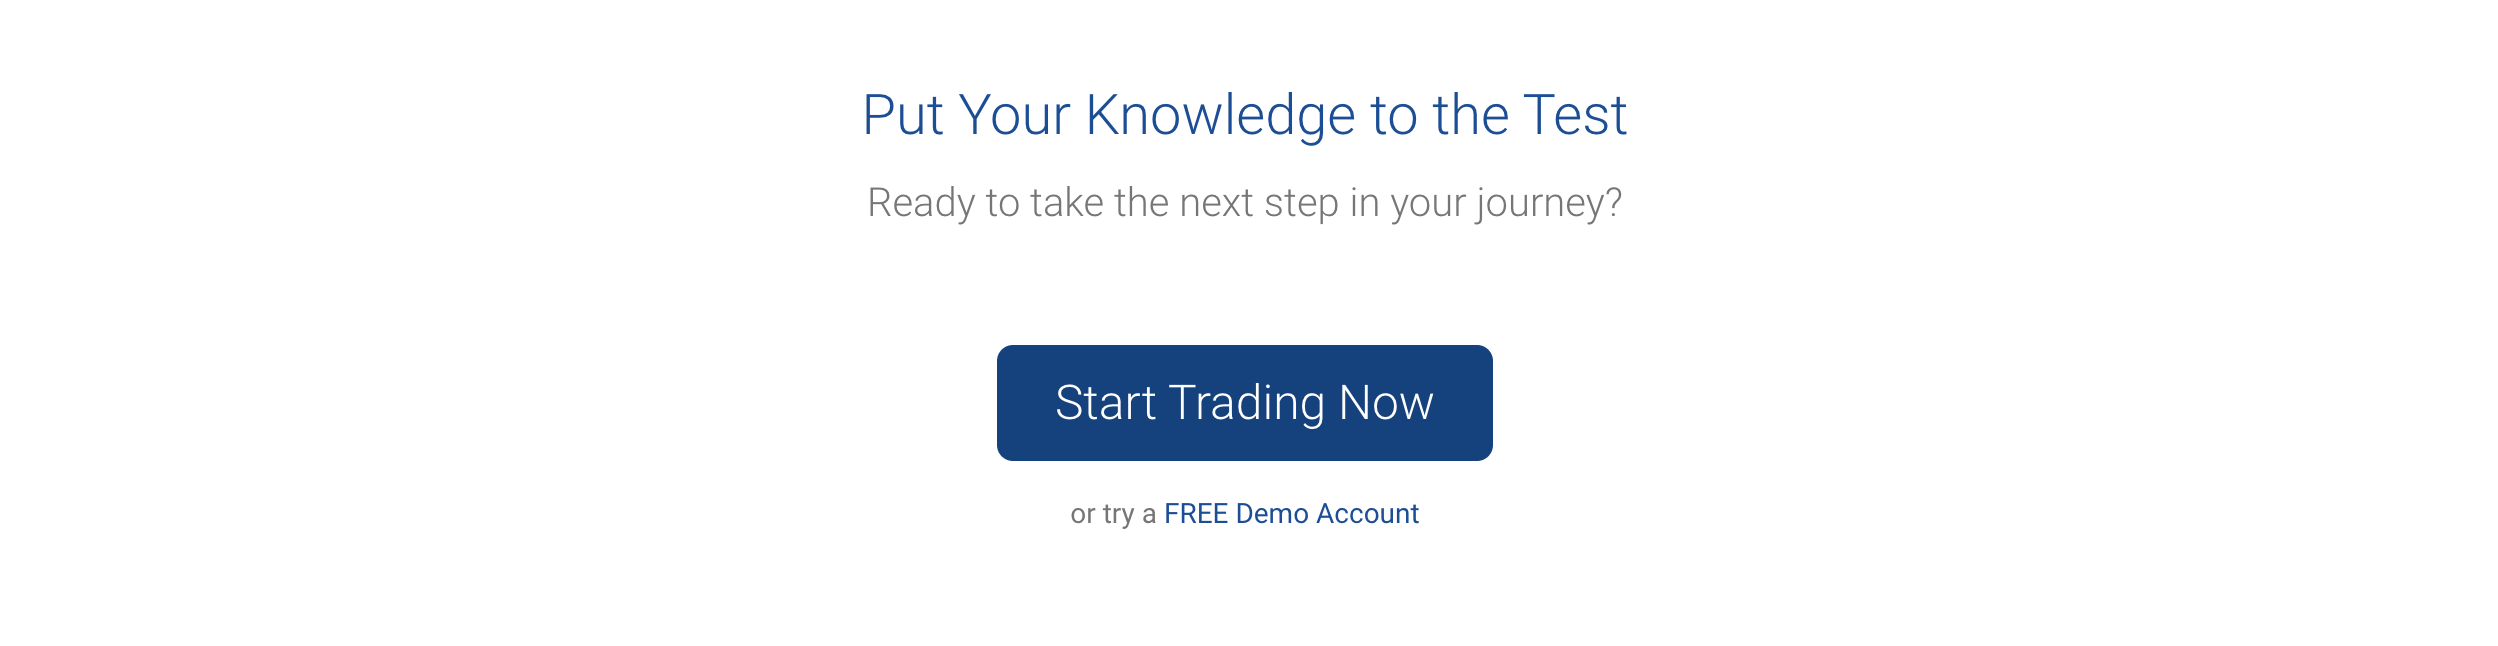 To open a demo account, simply click on the button on the website